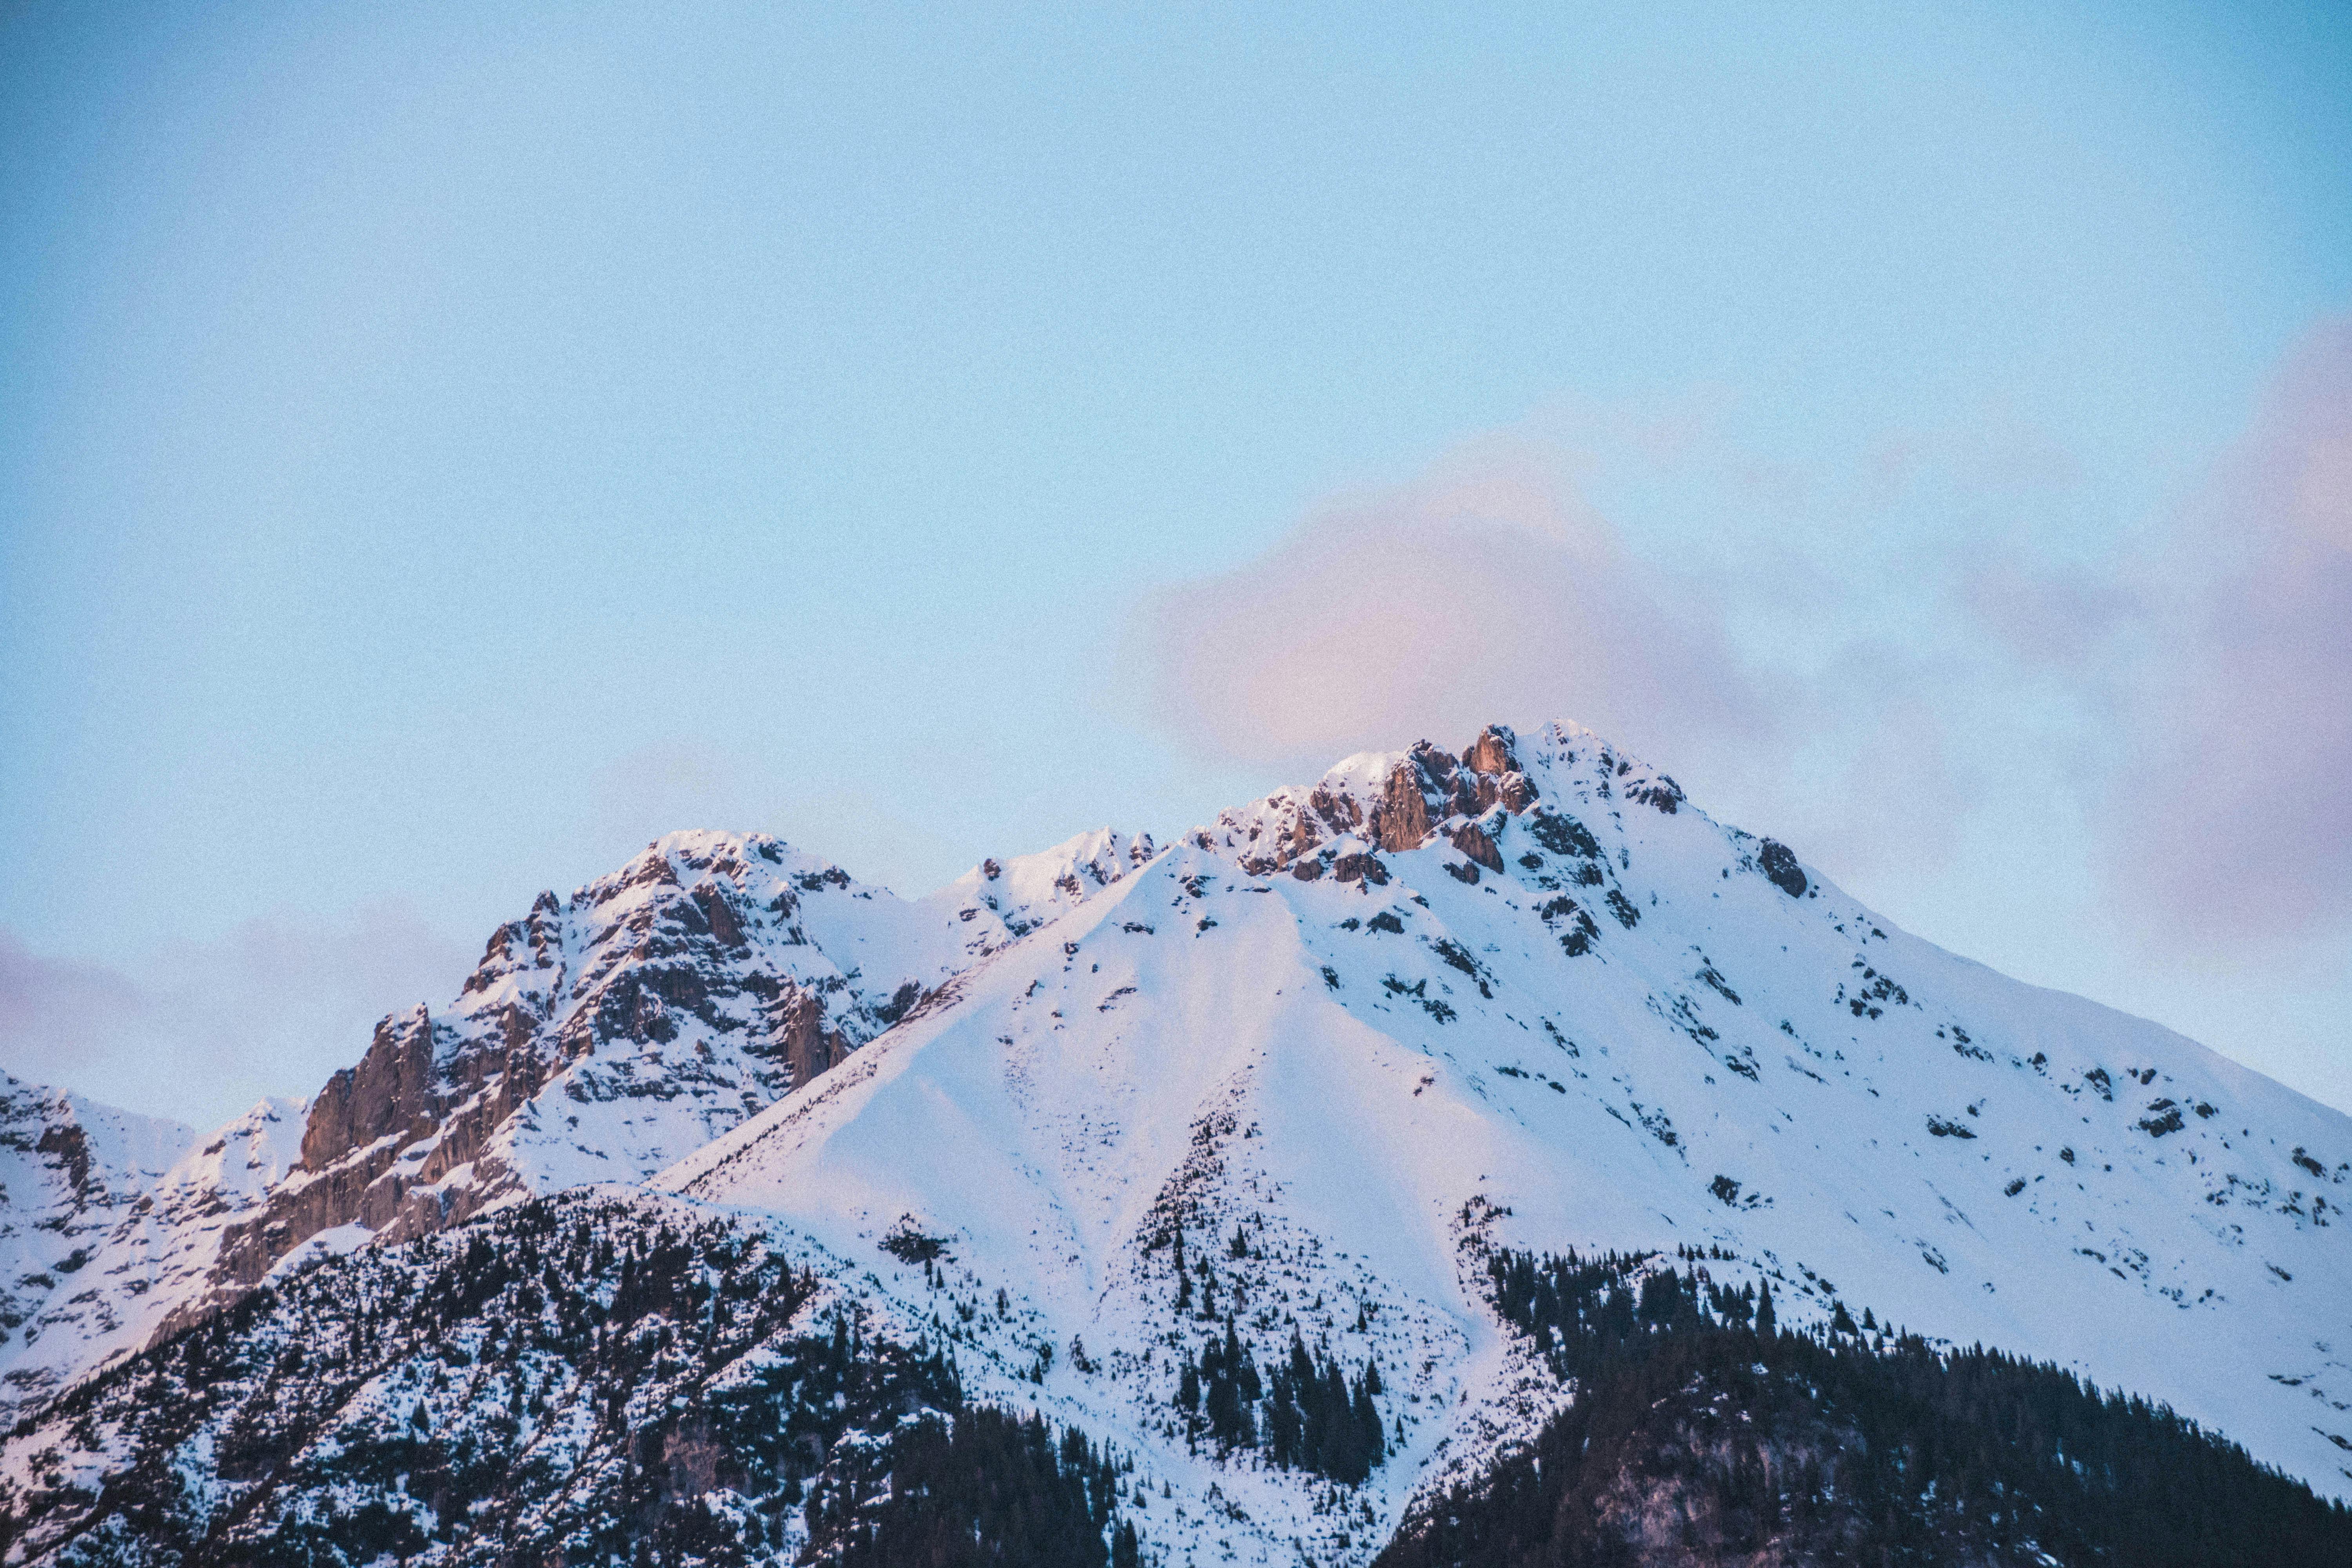 Snow Capped Mountains Under the Cloudy Skies · Free Stock Photo